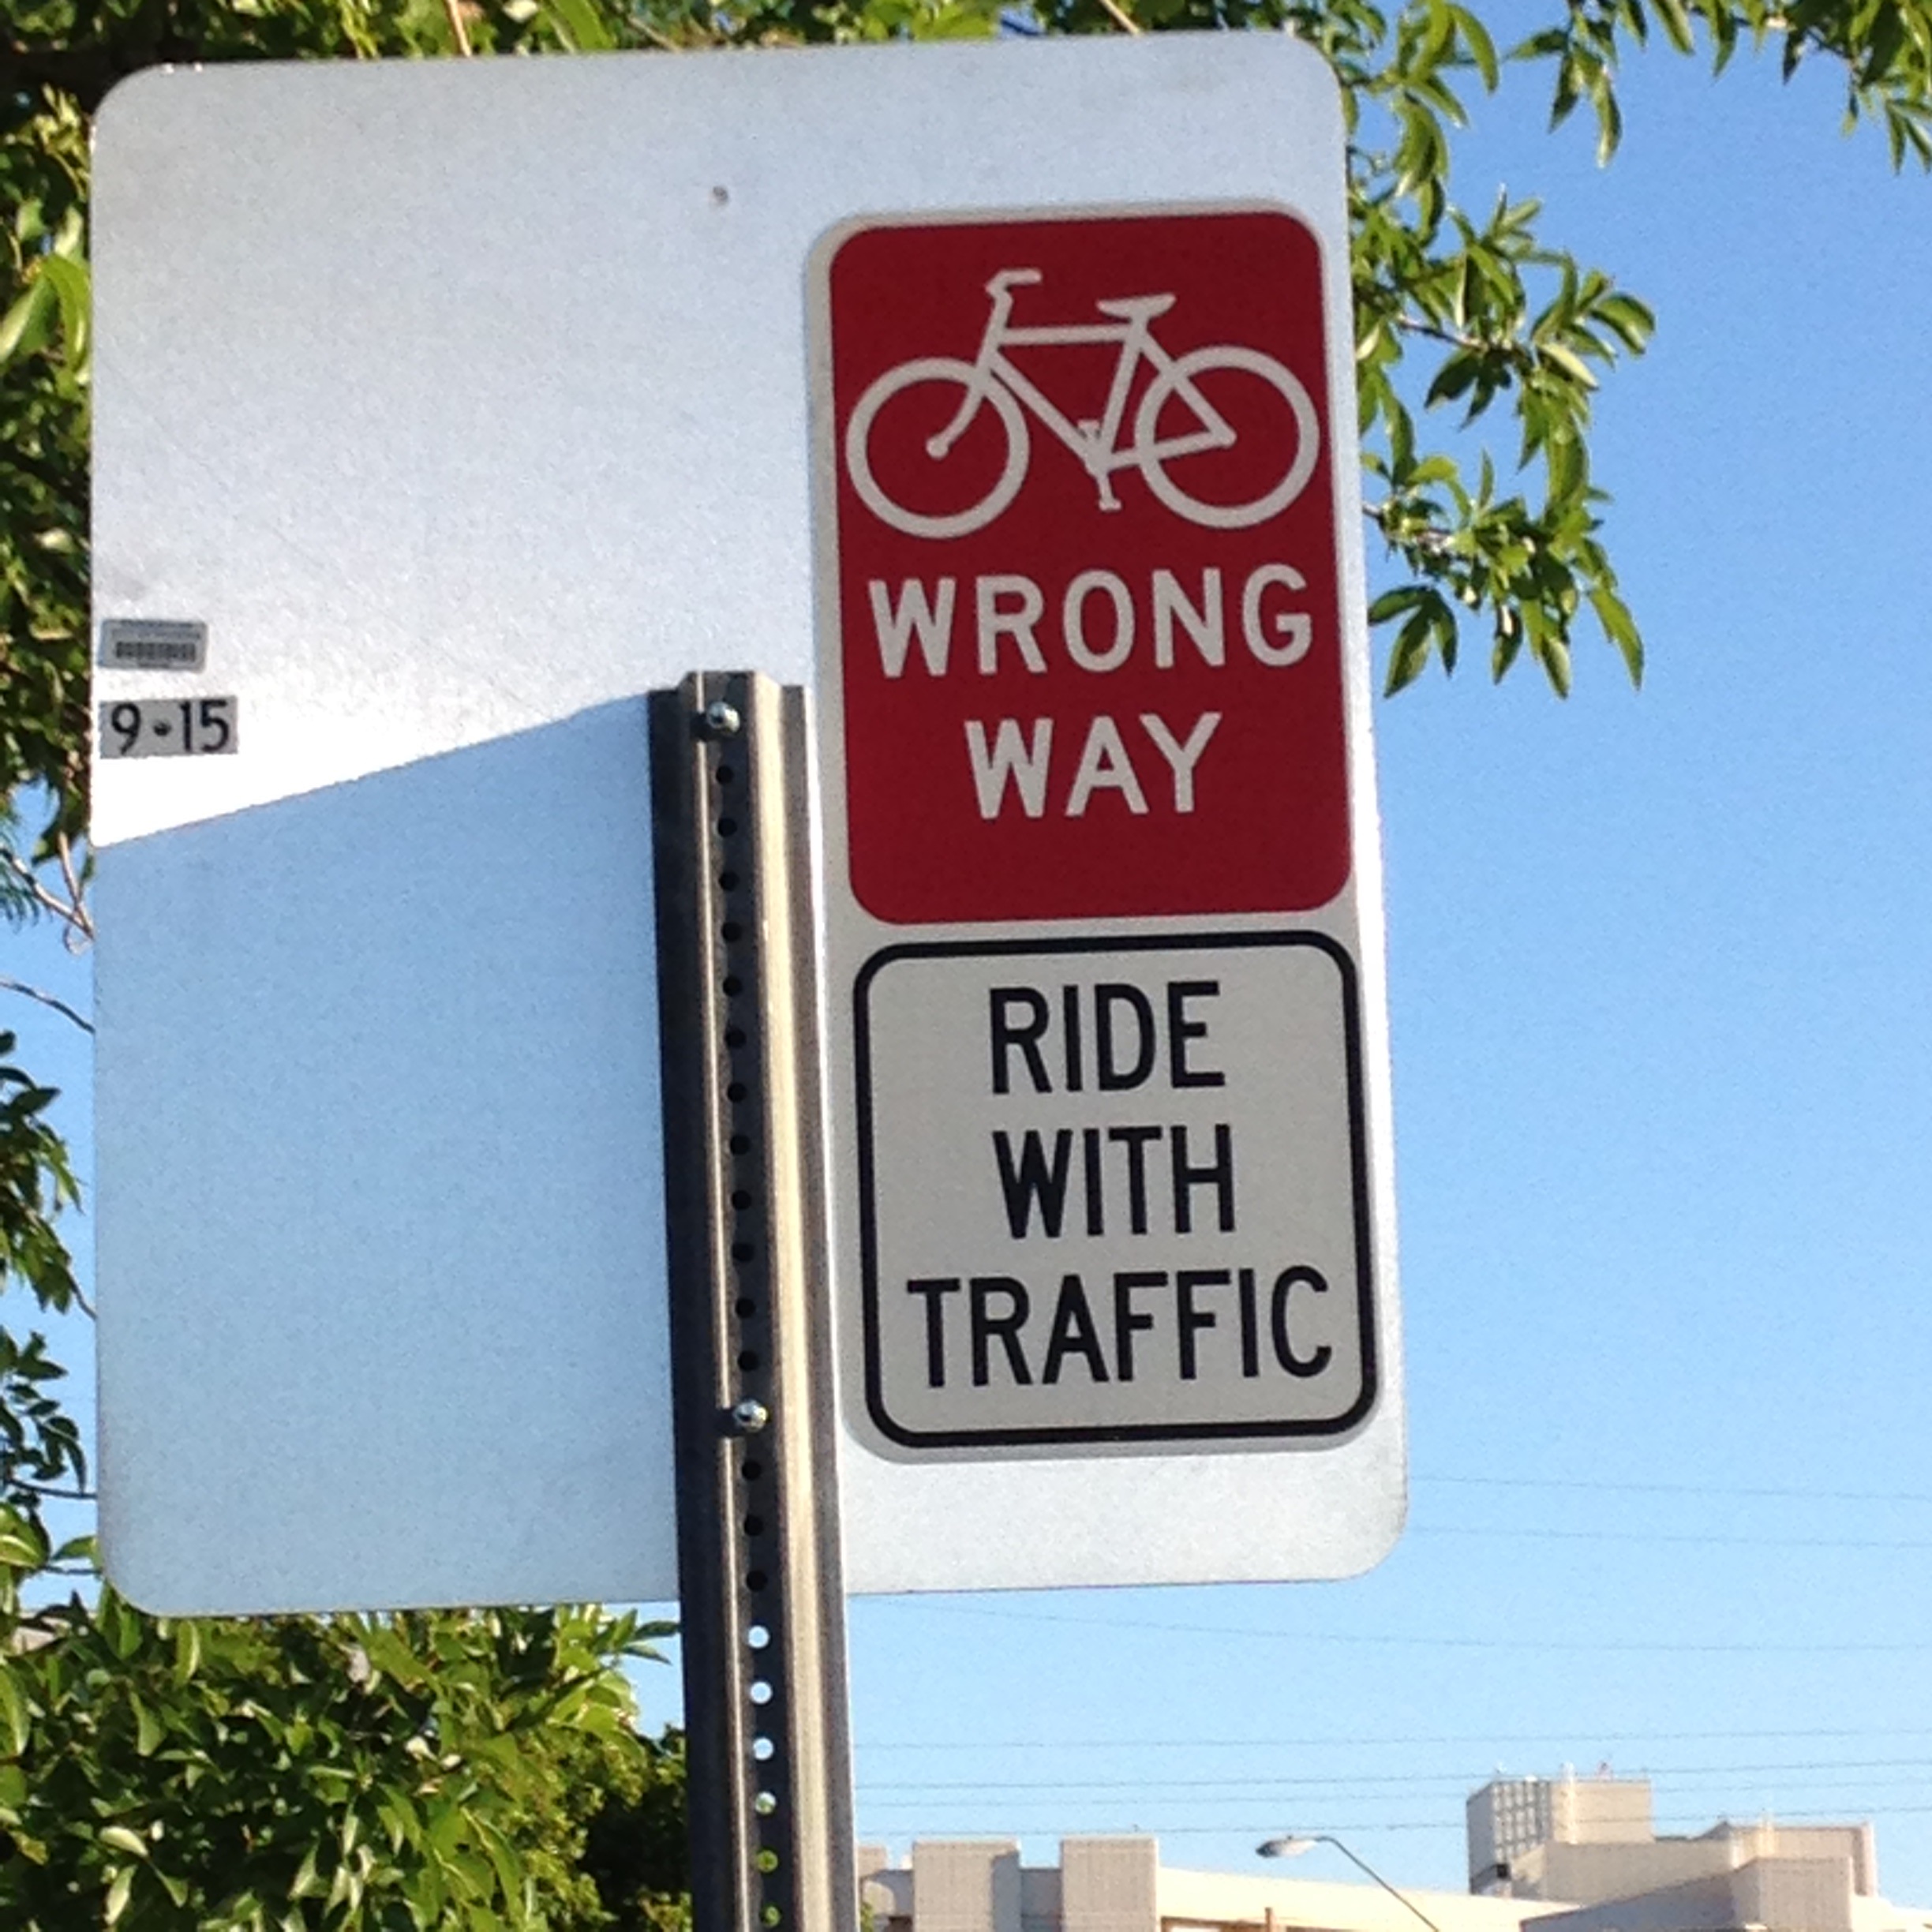 Wrong way bike sign, says Ride with Traffic